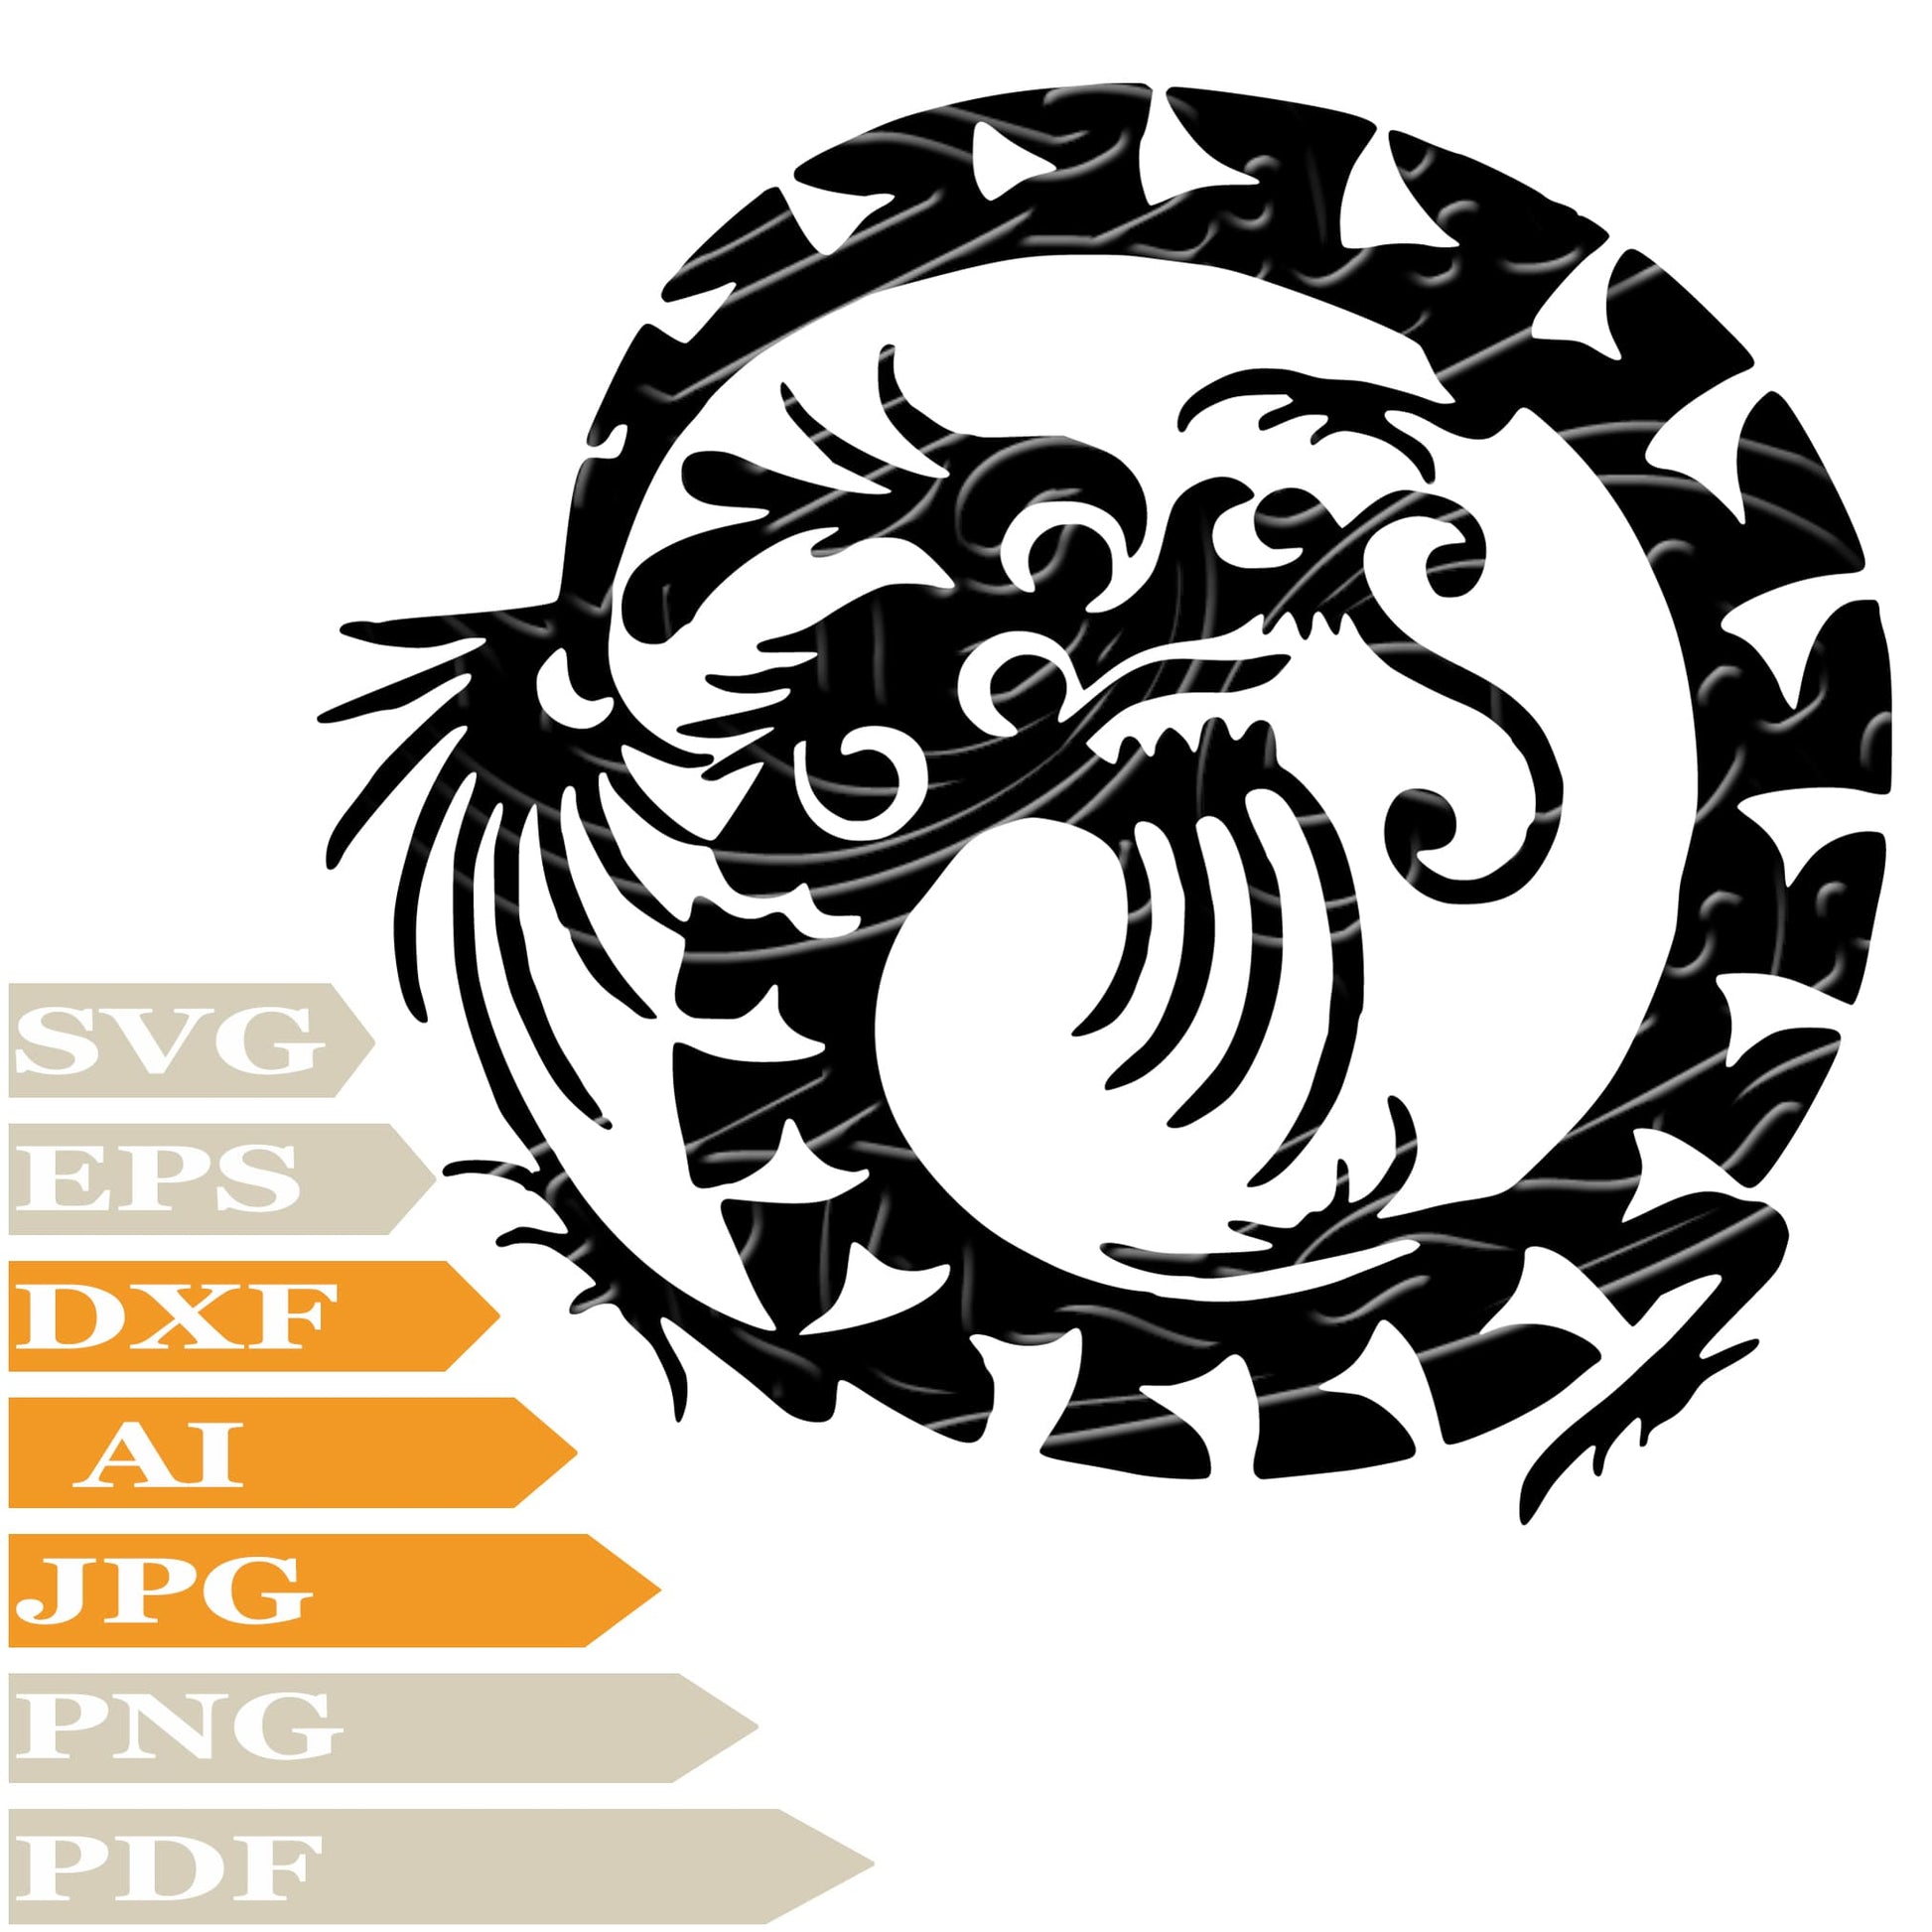 Dragon, Funny Dragon Svg File, Image Cut, Png, For Tattoo, Silhouette, Digital Vector Download, Cut File, Clipart, For Cricut